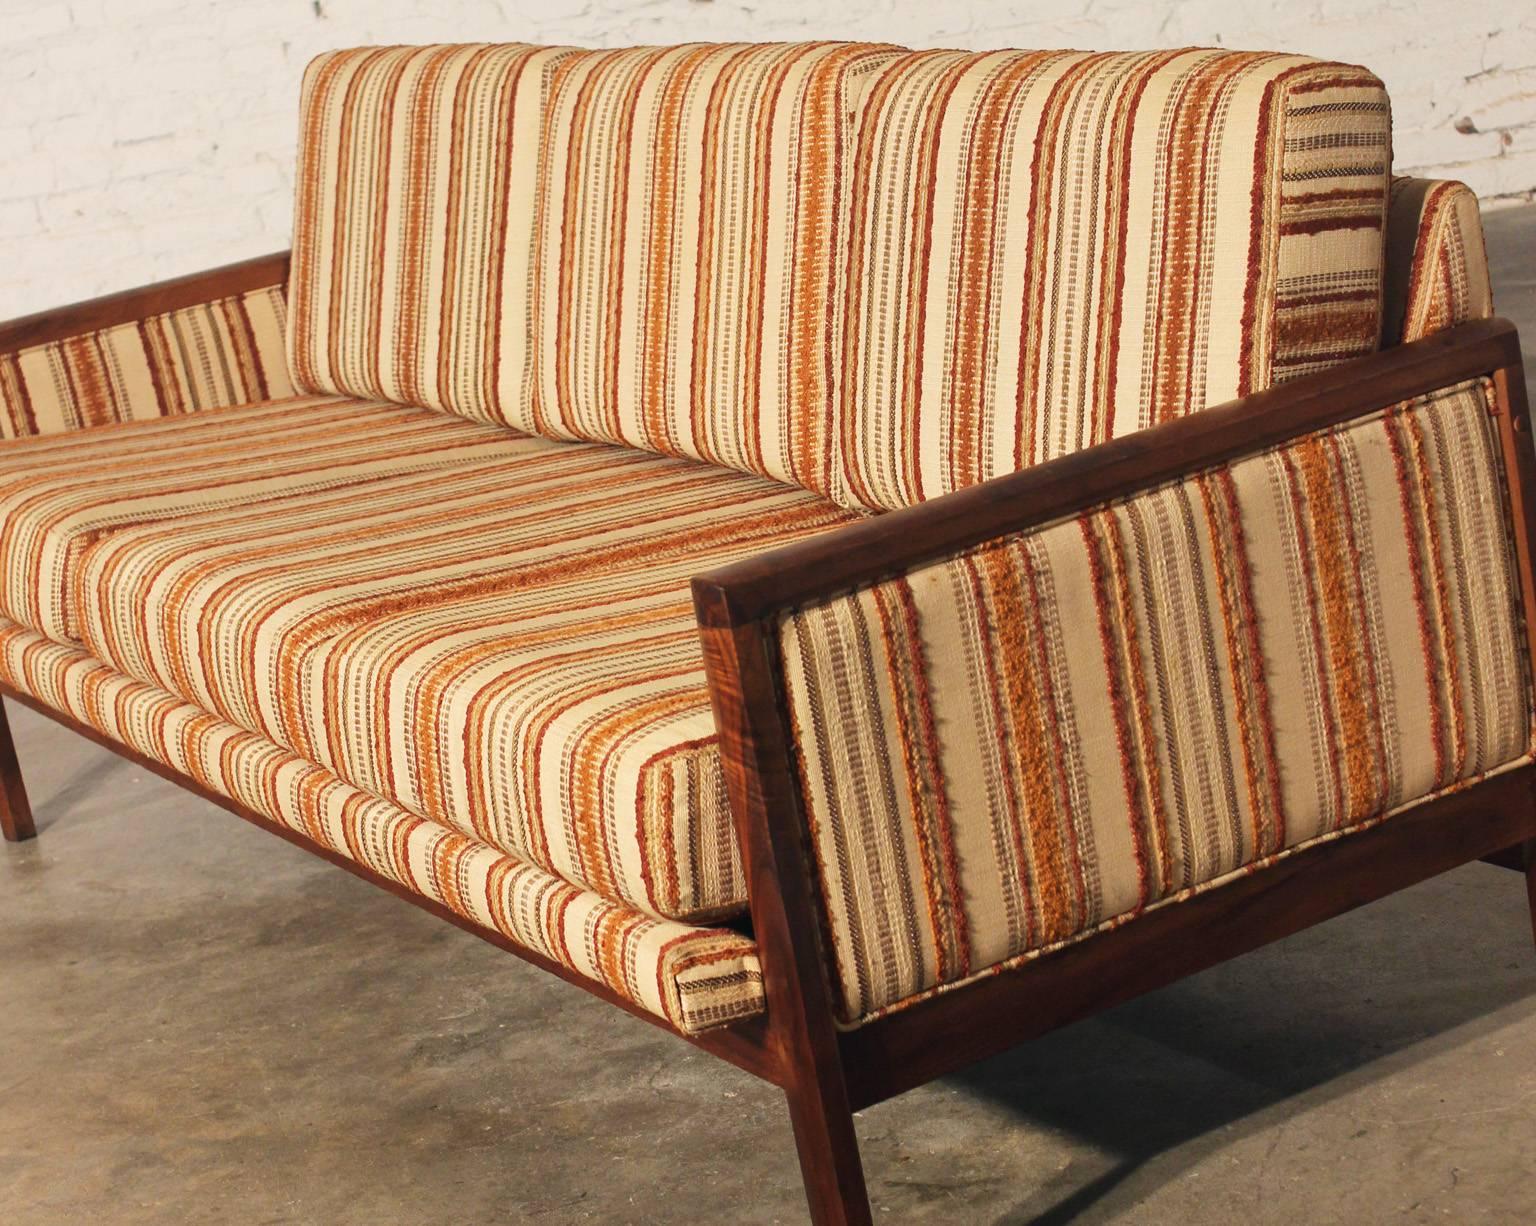 Fabulous striped Mid-Century Modern sofa with walnut trim in wonderful age appropriate condition.

This walnut trimmed sofa is a wonderful example of Mid-Century Modern simplicity. The wood trim which actually forms the legs, arms and bottom